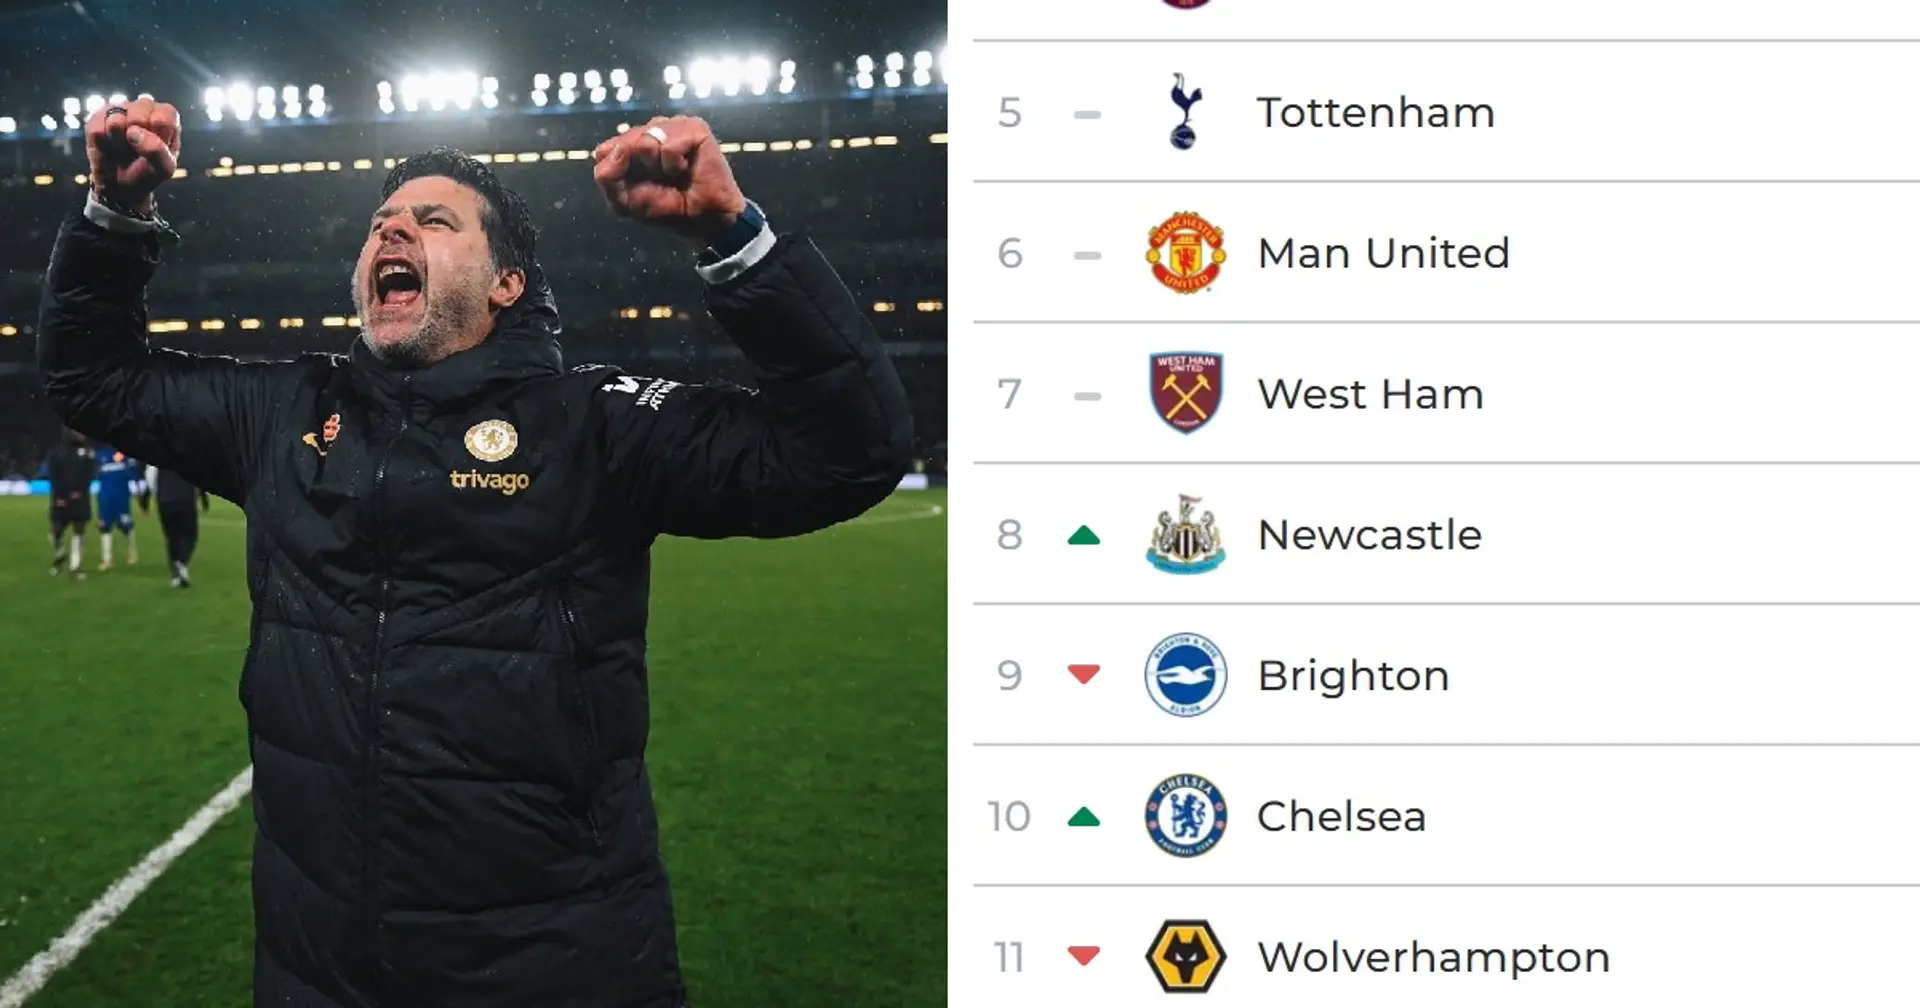 Chelsea climb to 10th on the Premier League table with incredible Man United win